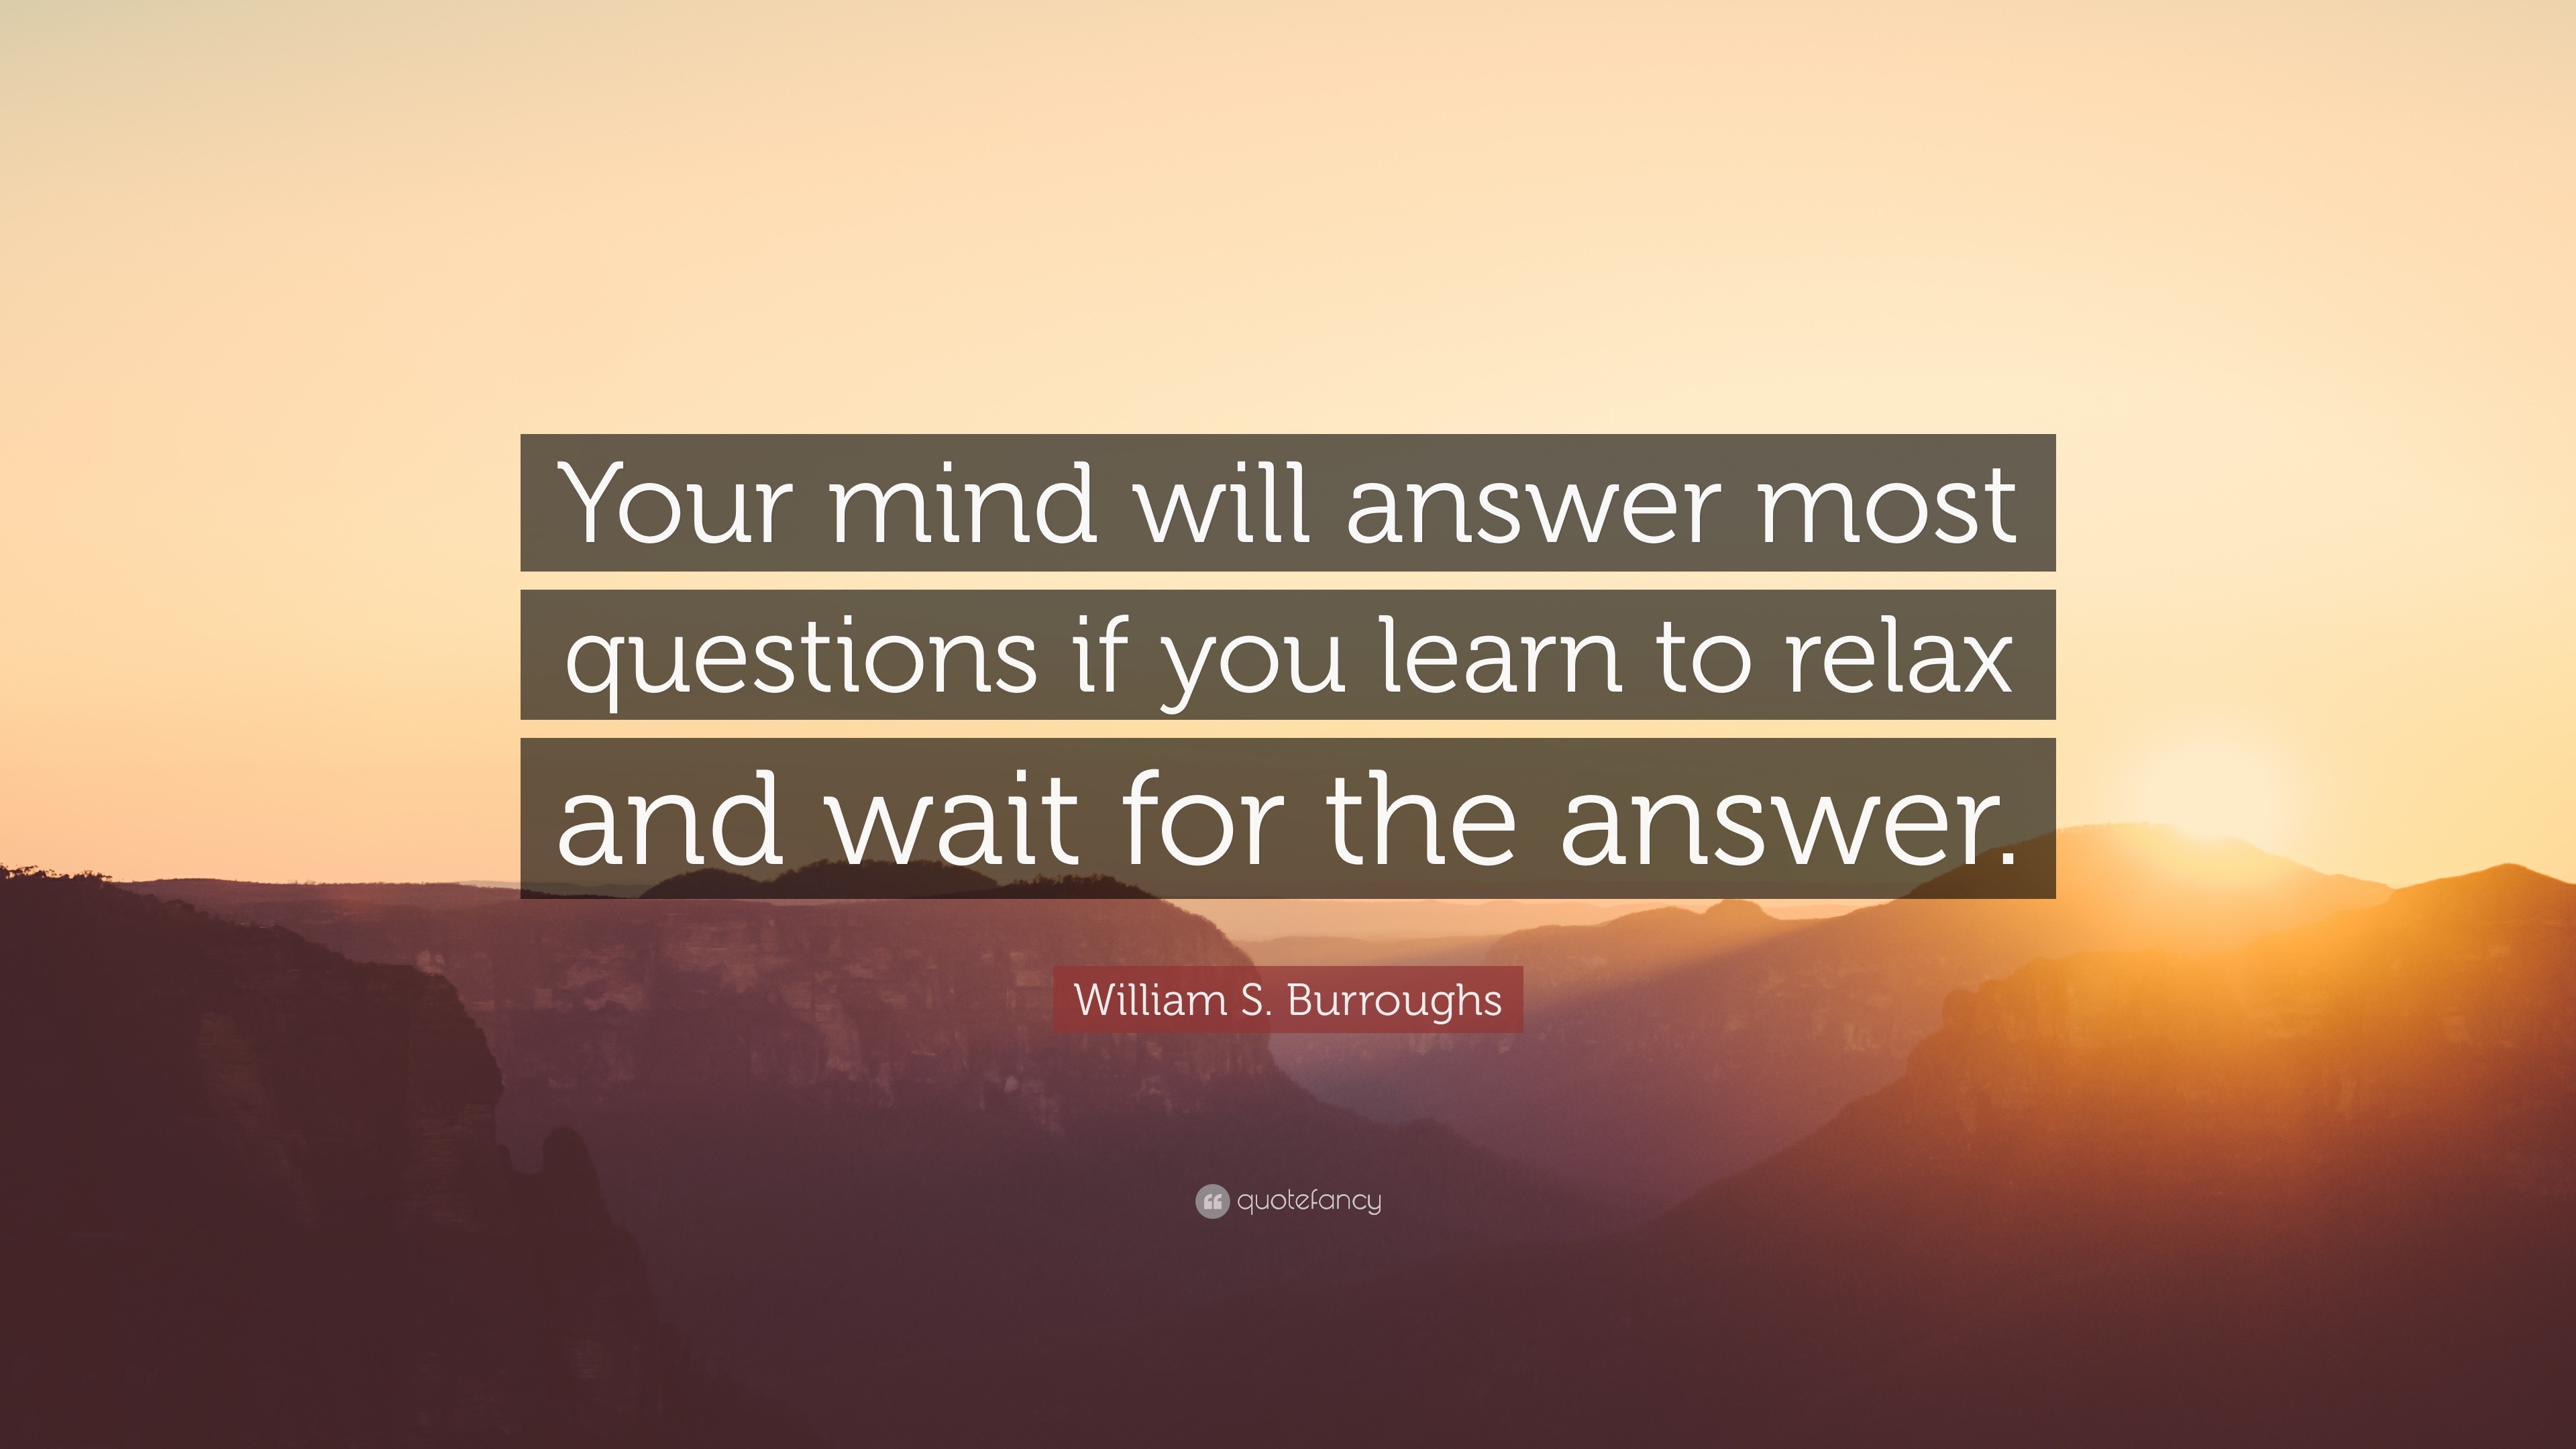 William S. Burroughs Quote: “Your mind will answer most questions if ...